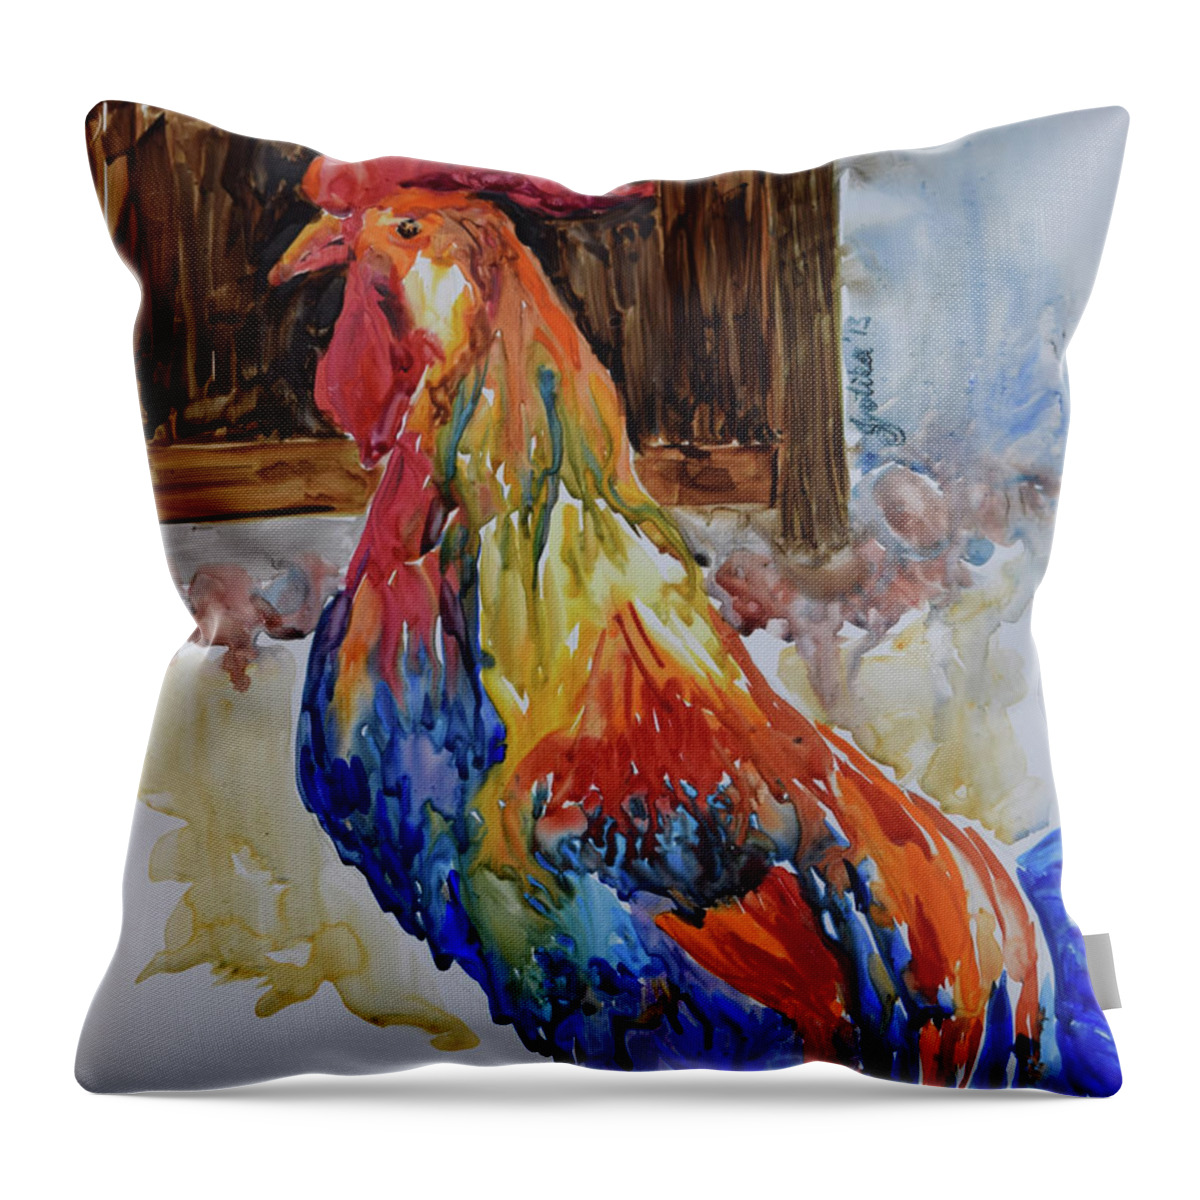  Throw Pillow featuring the painting Rooster by Jyotika Shroff